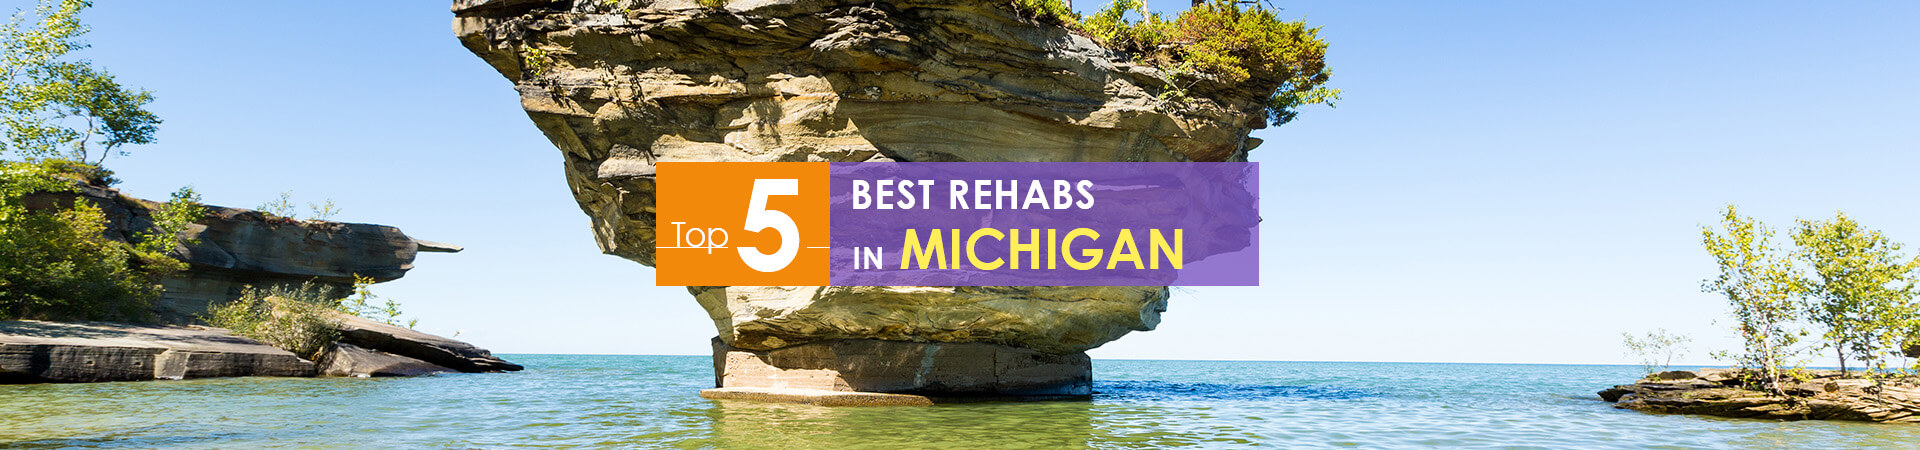 6 Best Drug Rehabs in Michigan for Substance Addiction Treatment